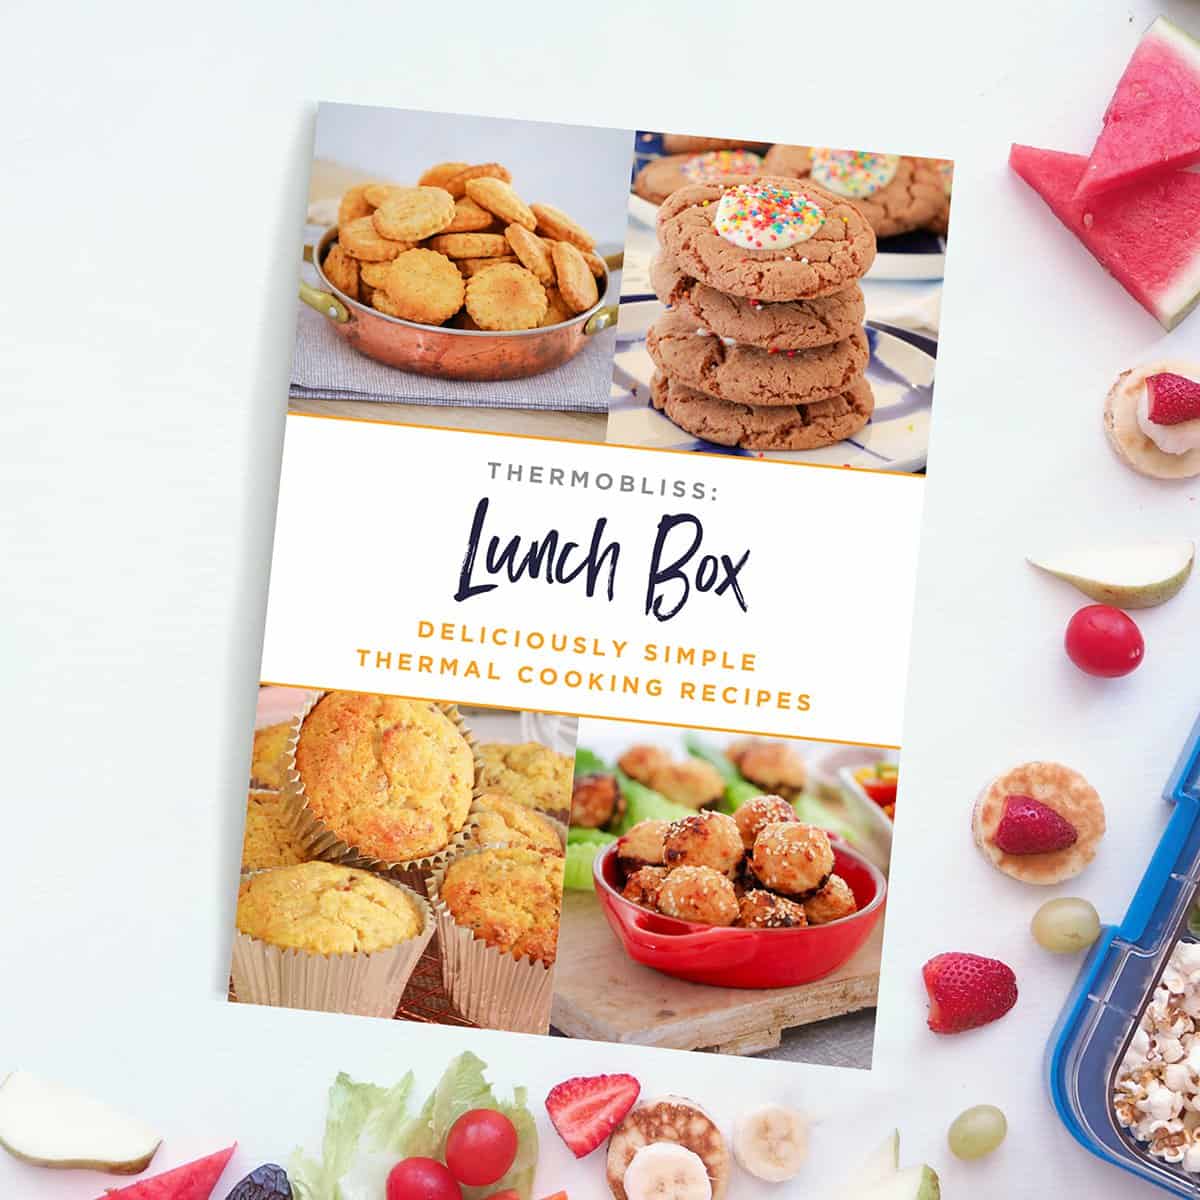 A ThermoBliss Lunch Box recipe book